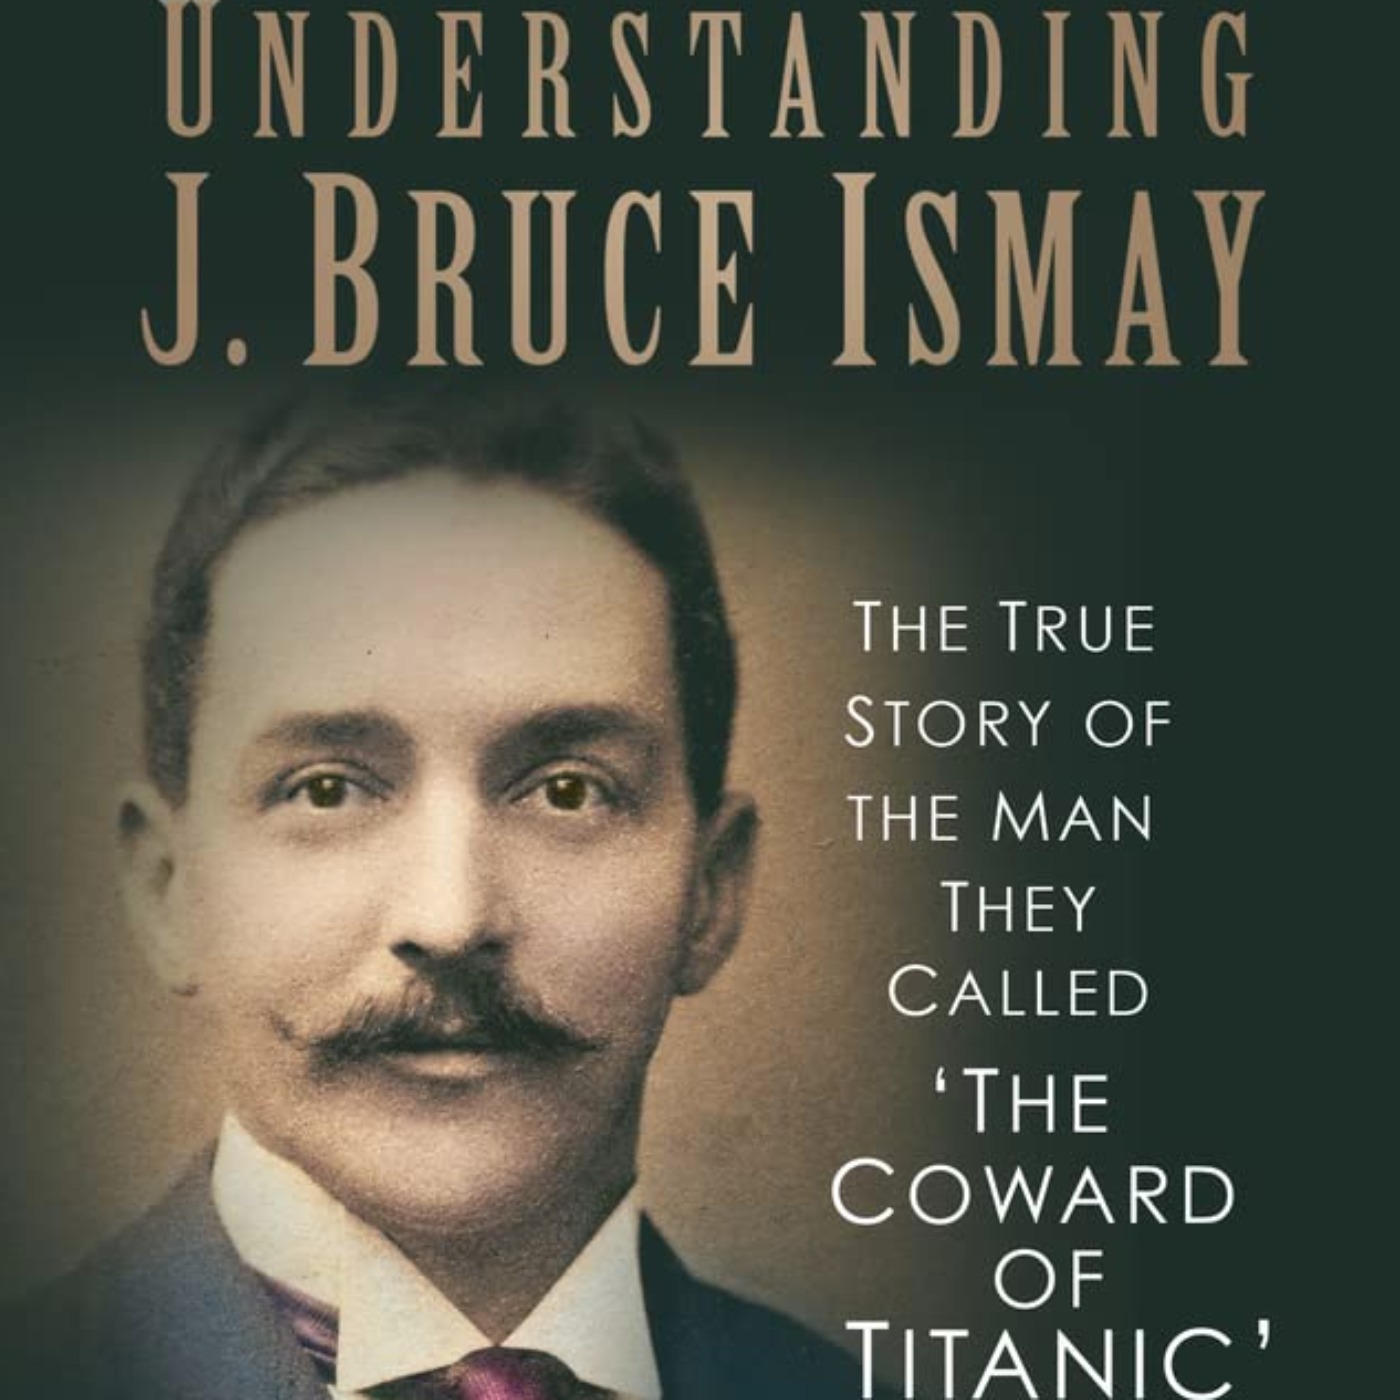 Titanic: Understanding J. Bruce Ismay with Clifford Ismay